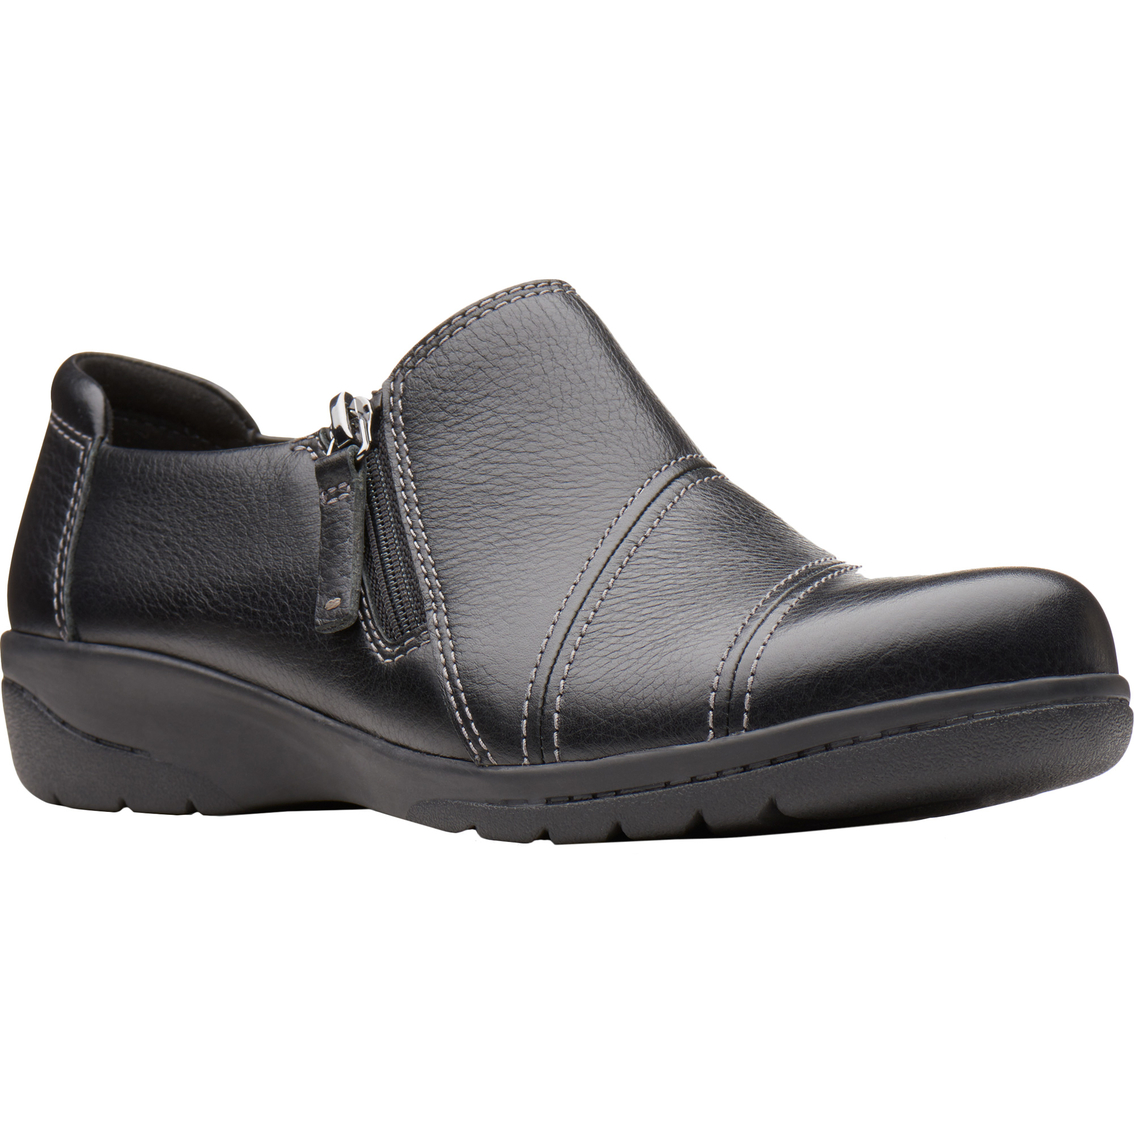 clarks shoes with side zipper